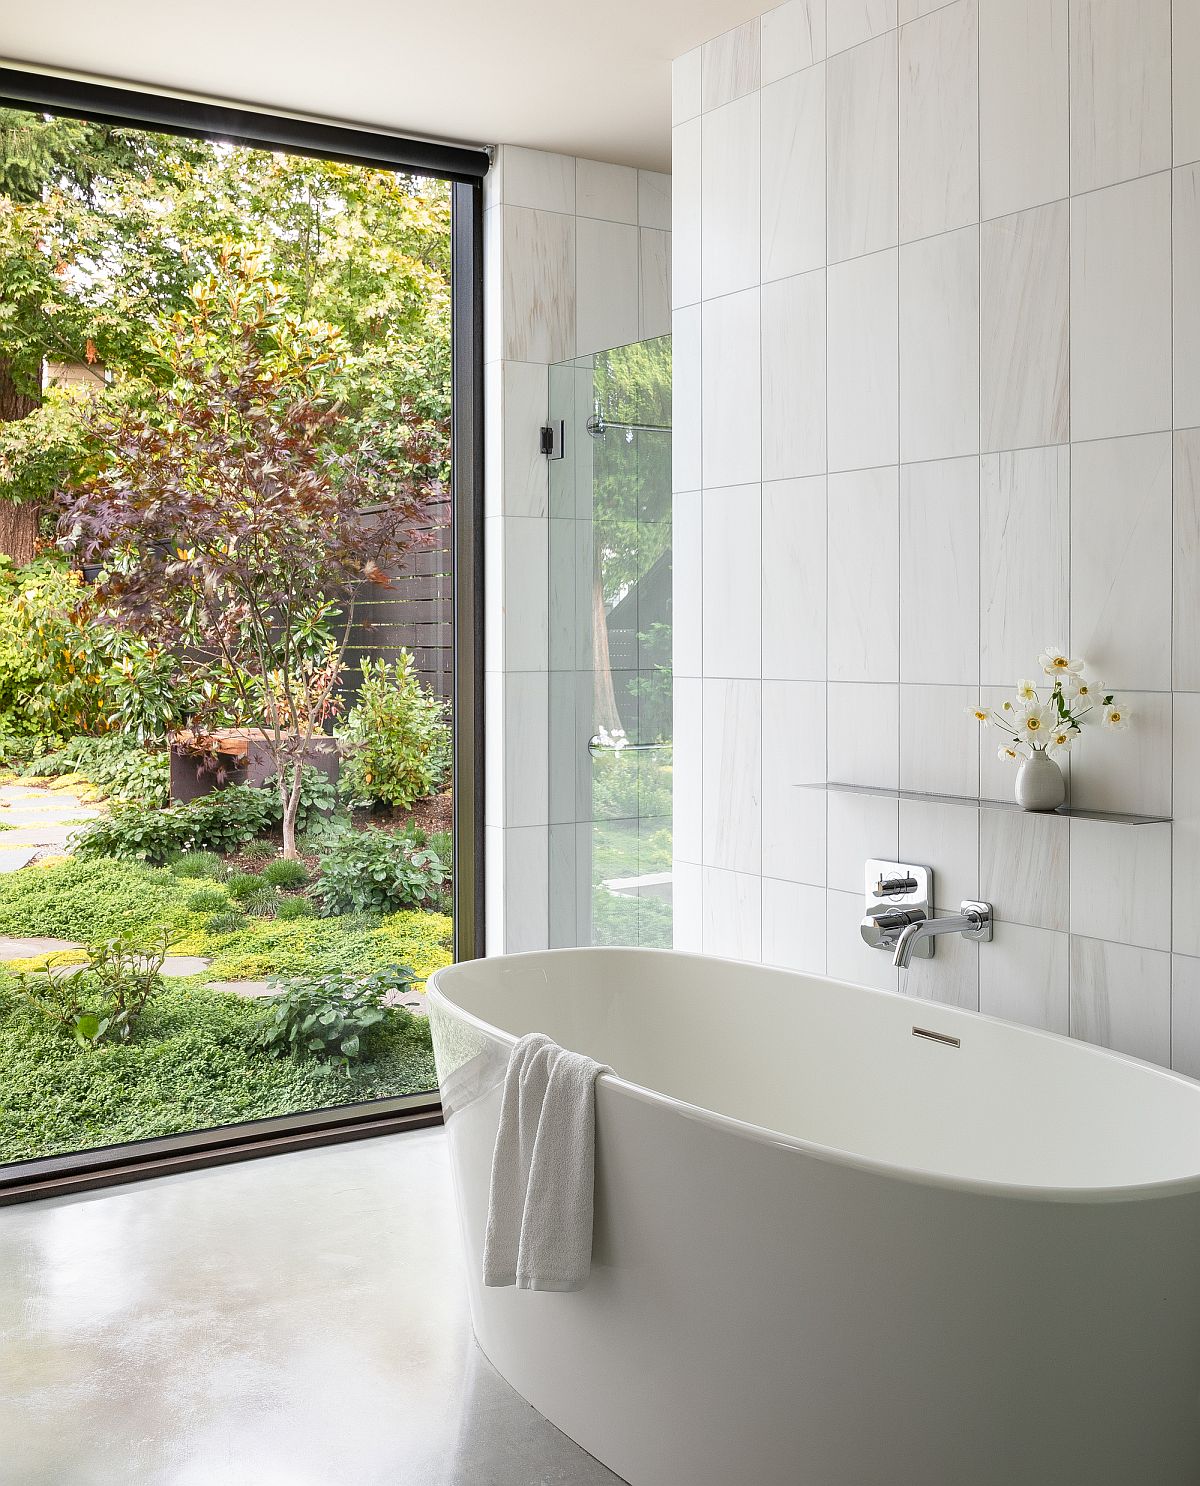 Freestanding-bathtub-in-white-is-a-hot-trend-that-you-can-embrace-for-a-more-relaxing-bathroom-15595